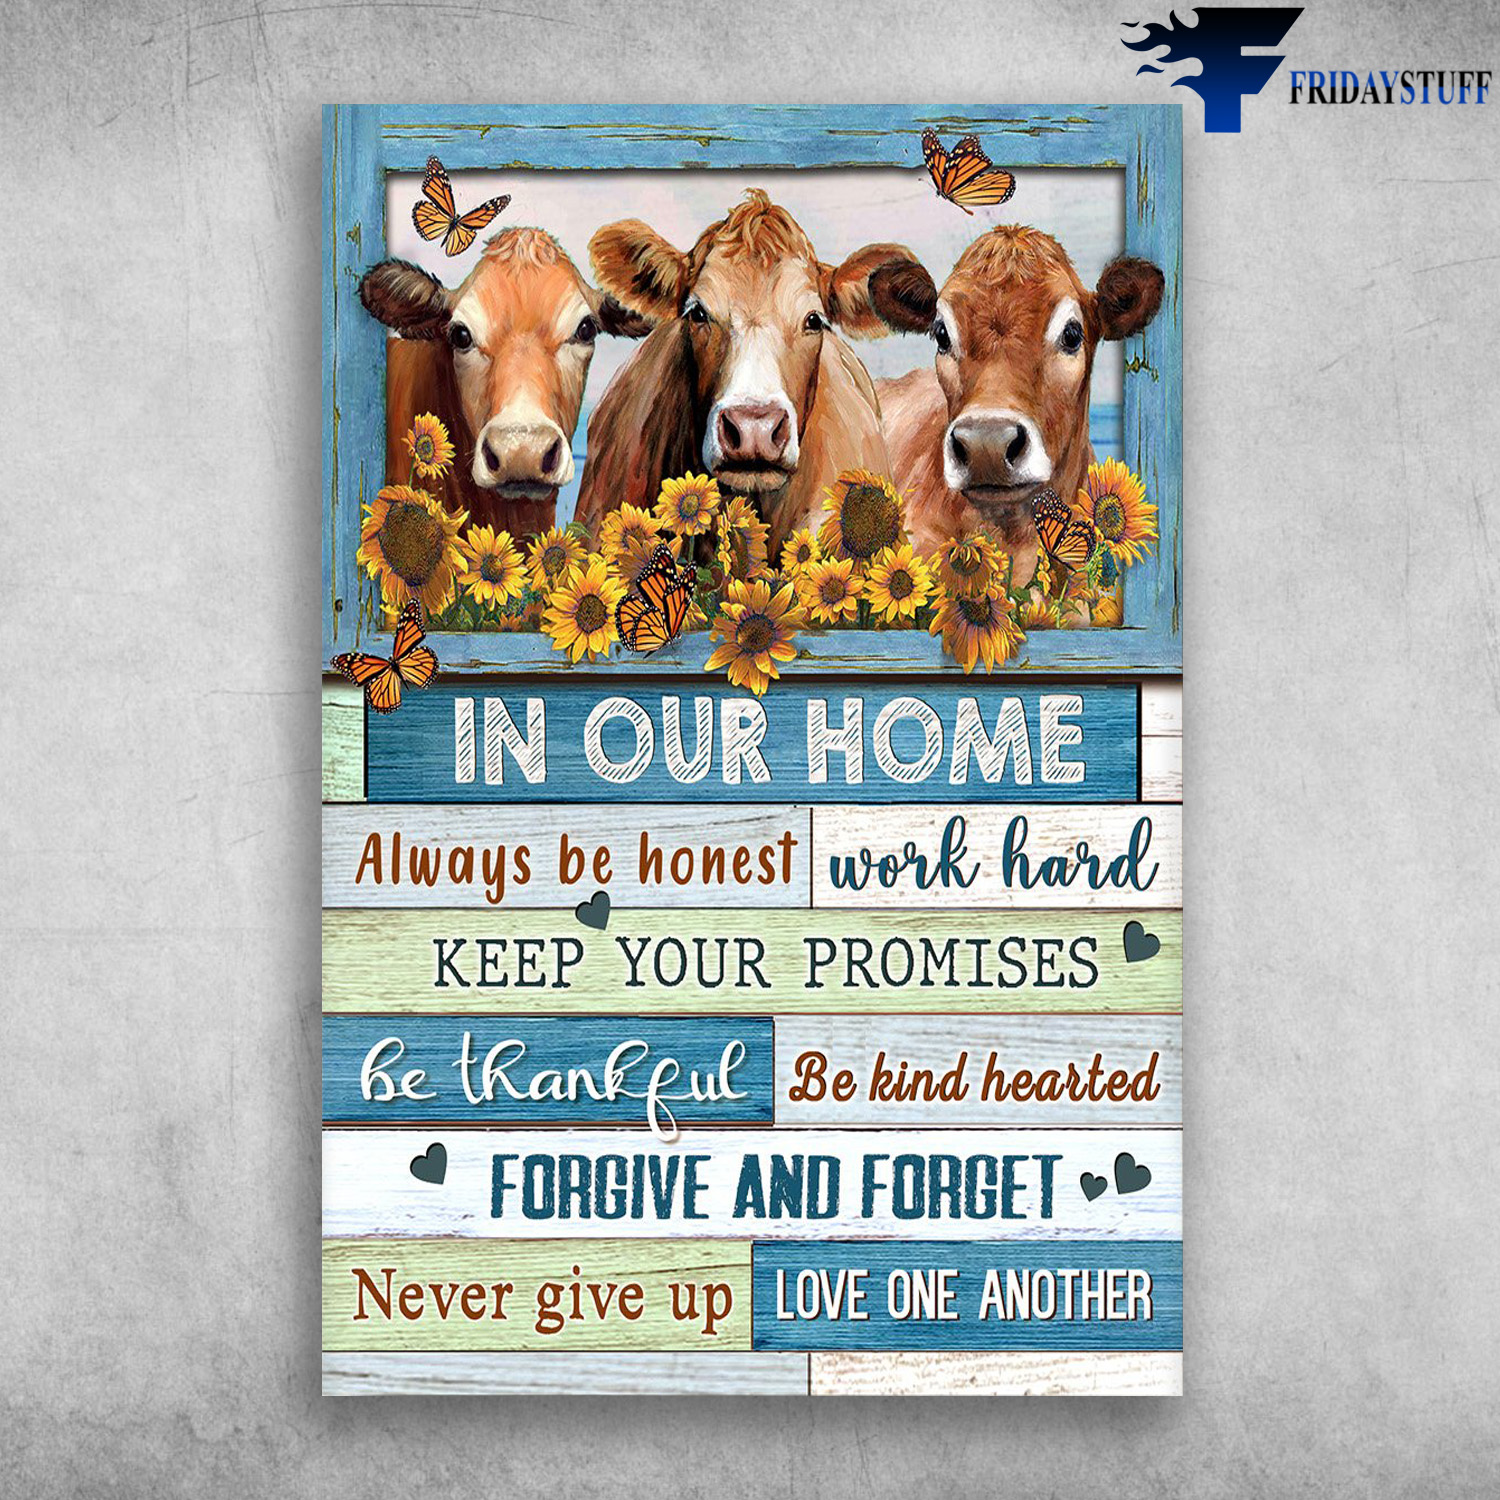 The Cows - In Our Home, Always Be Honest, Work Hard, Keep Your Promises, Be Thankful, Be Kind Hearted, Forgive And Forget, Never Give Up, Love One Another, Farmhouse